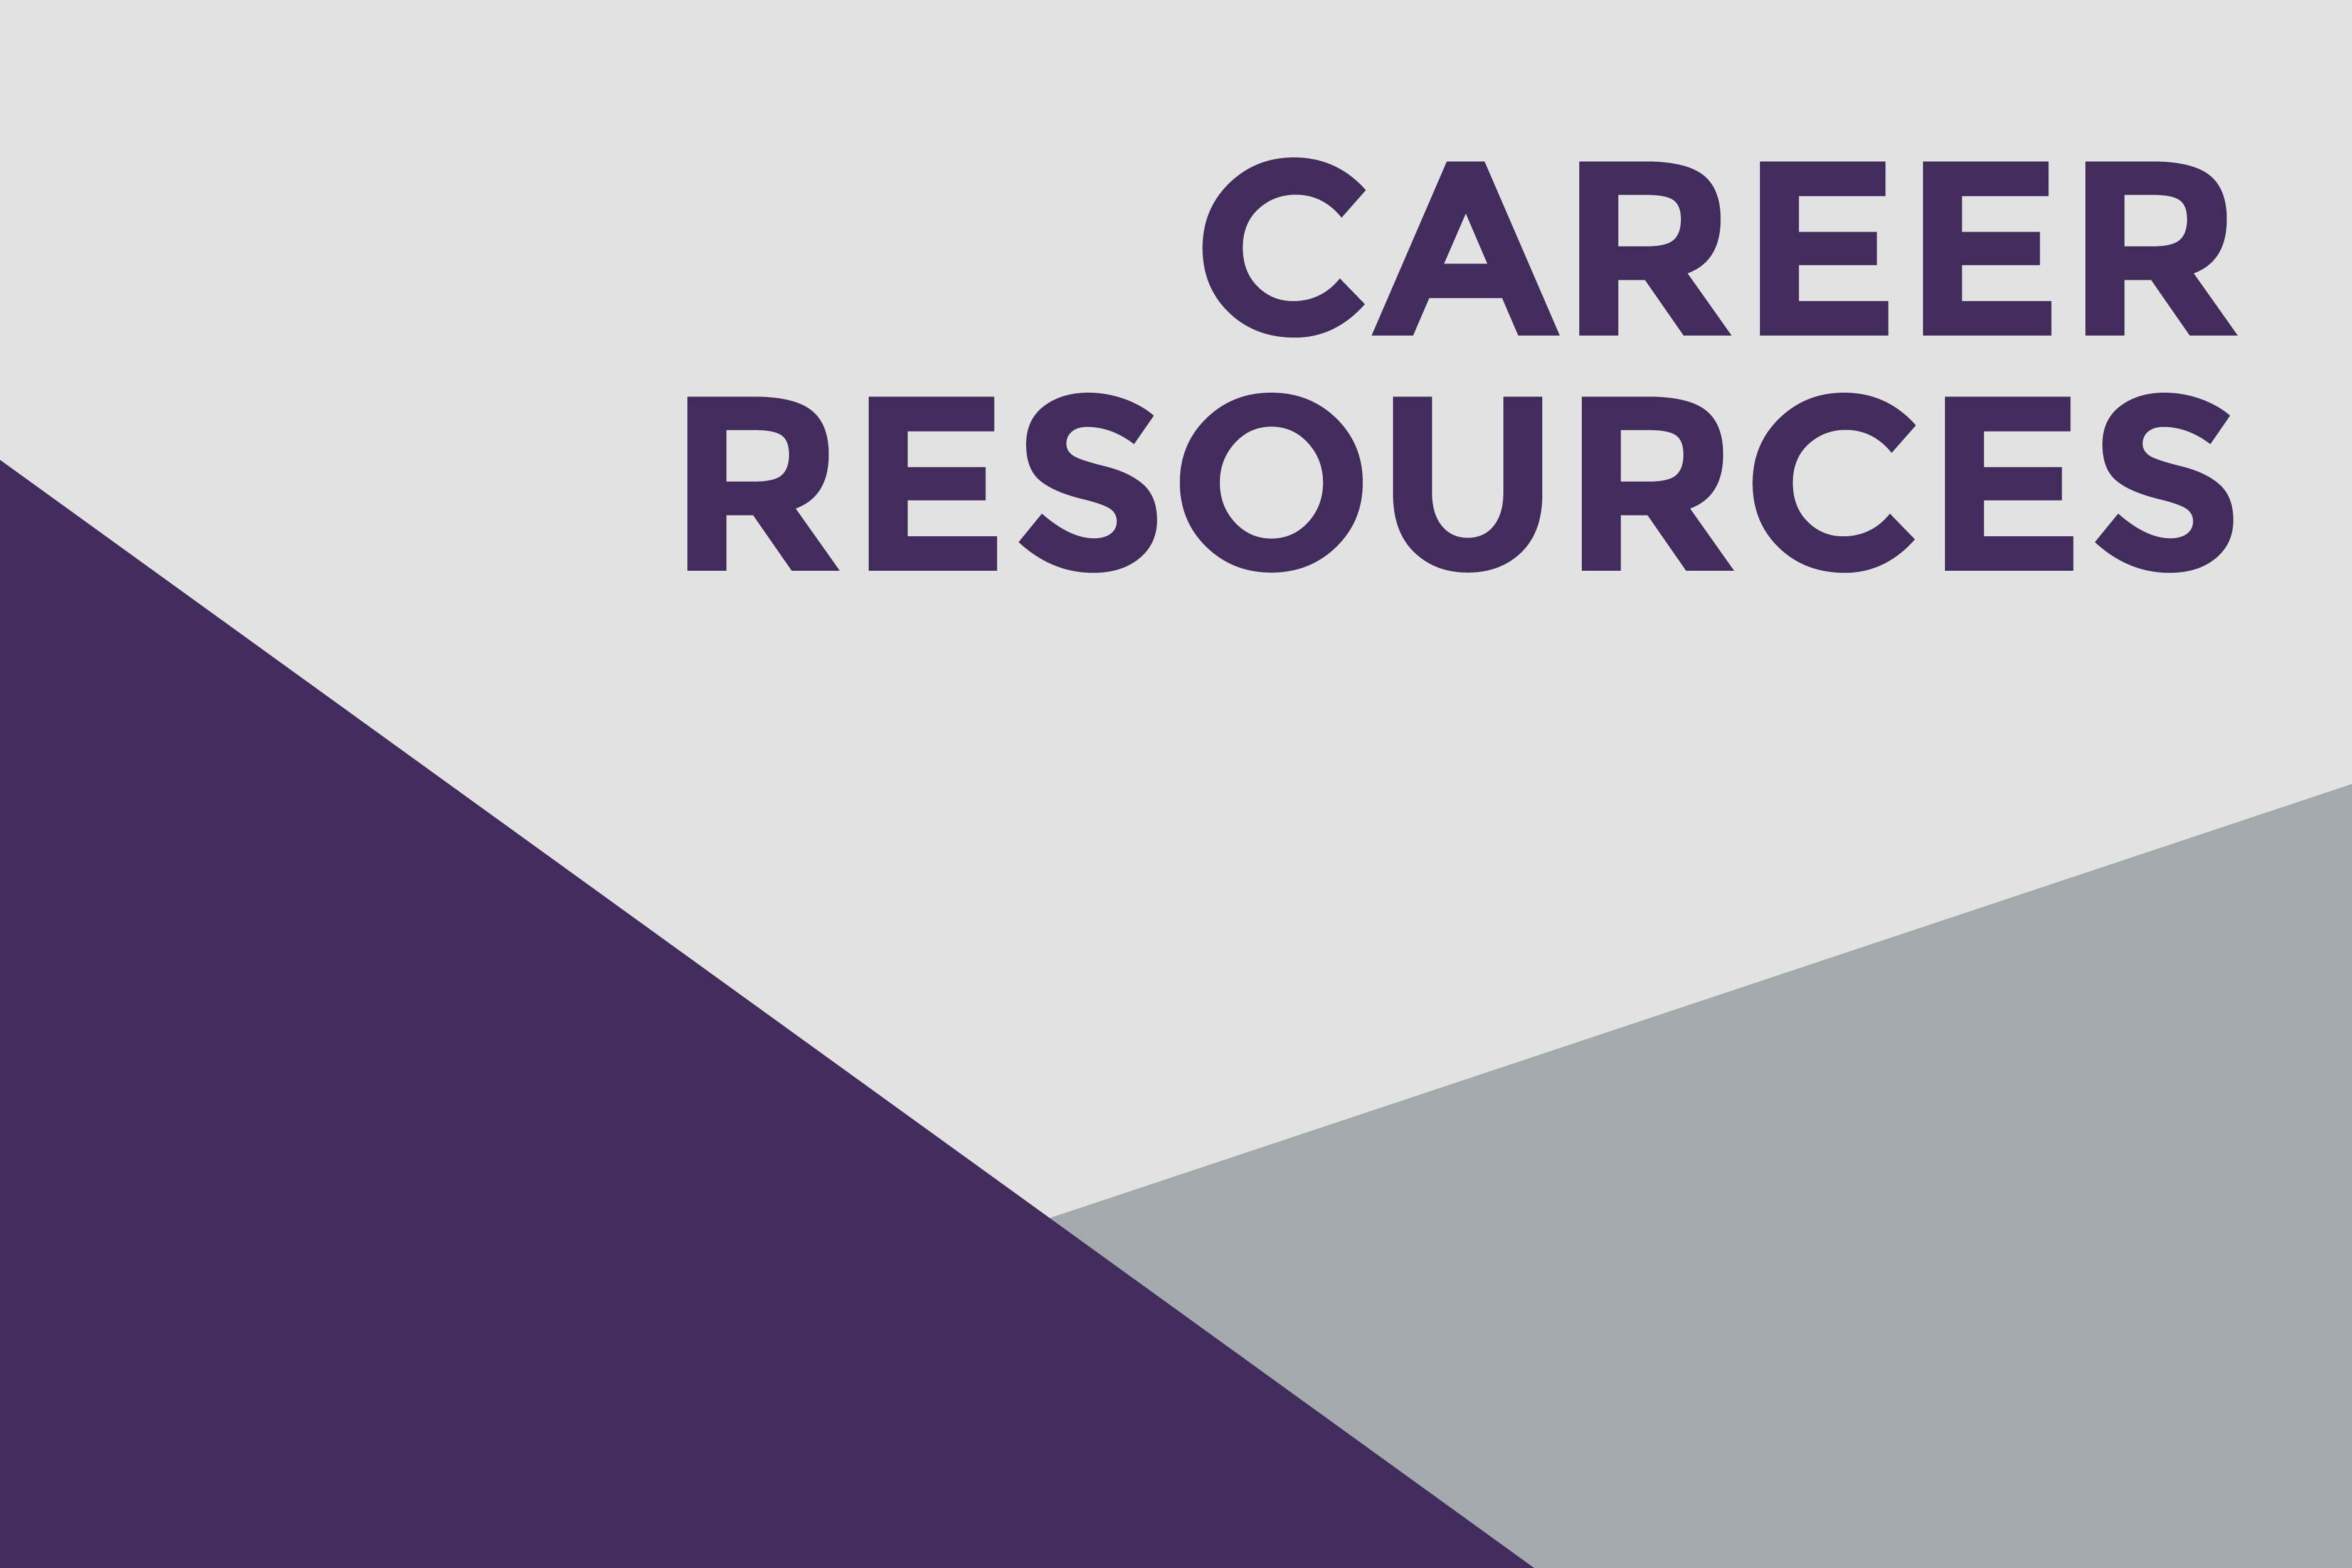 Career resources